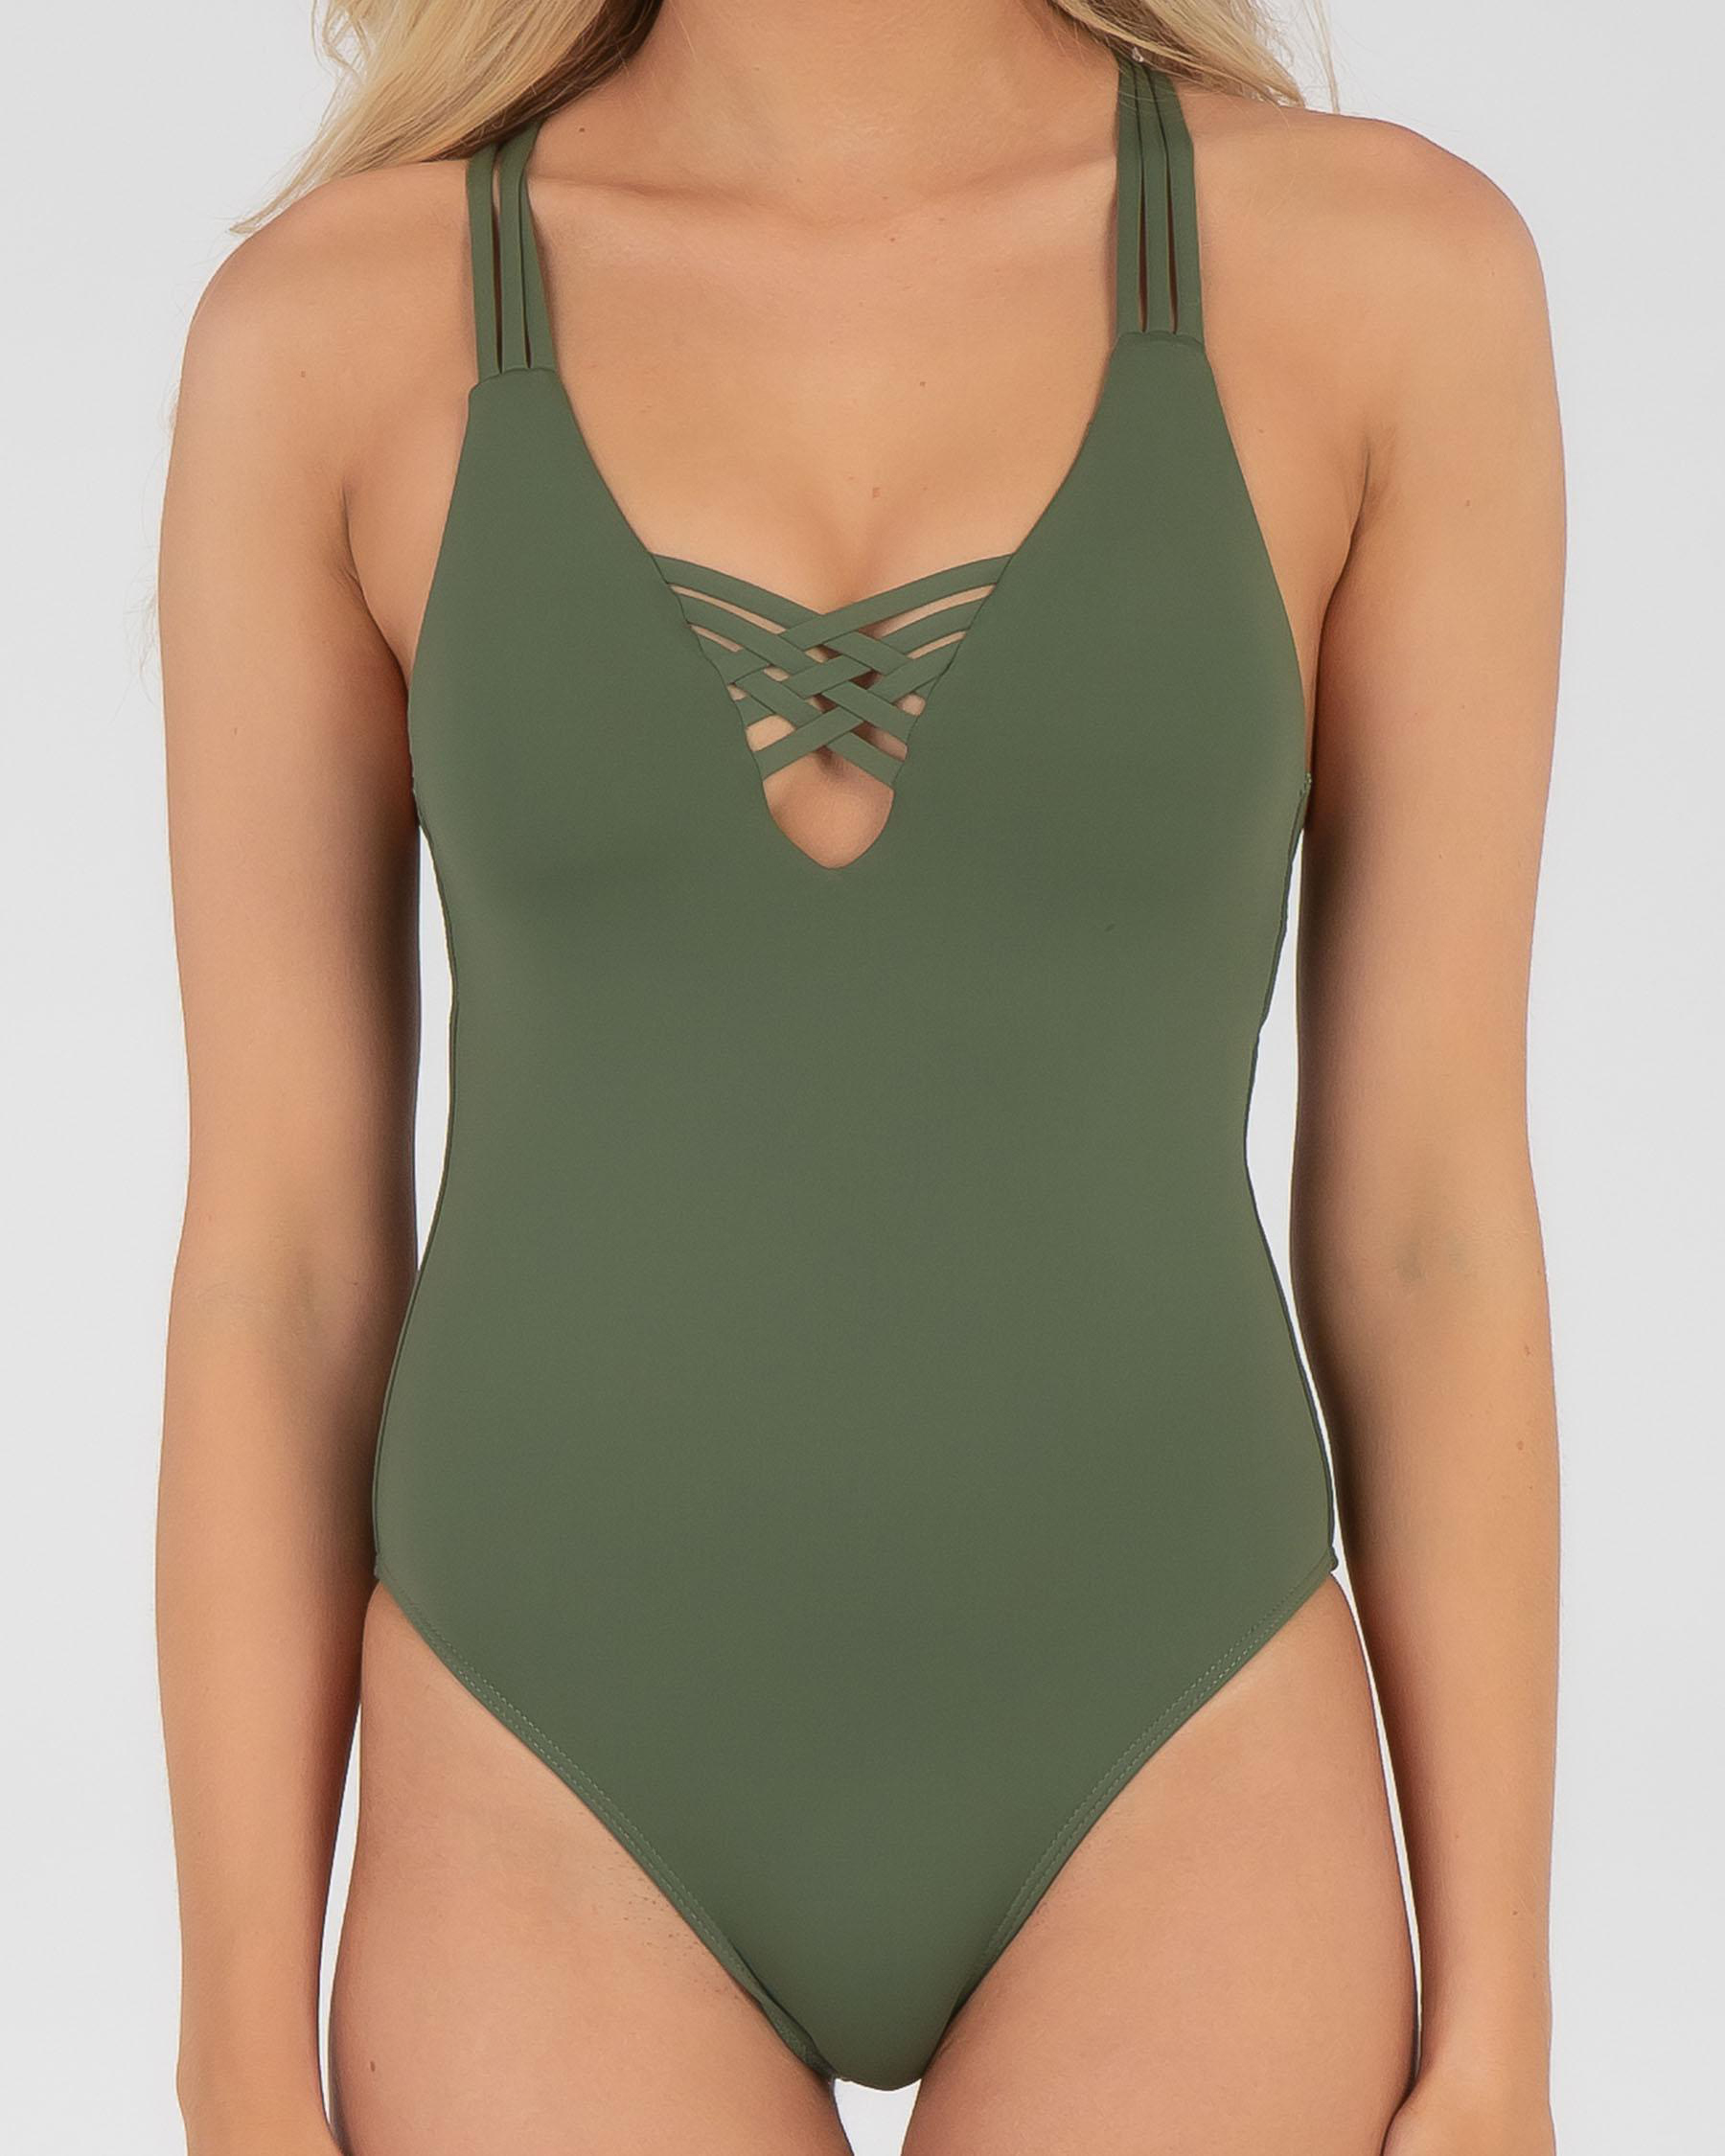 Shop Topanga Olivia One Piece Swimsuit In Olive Green Fast Shipping